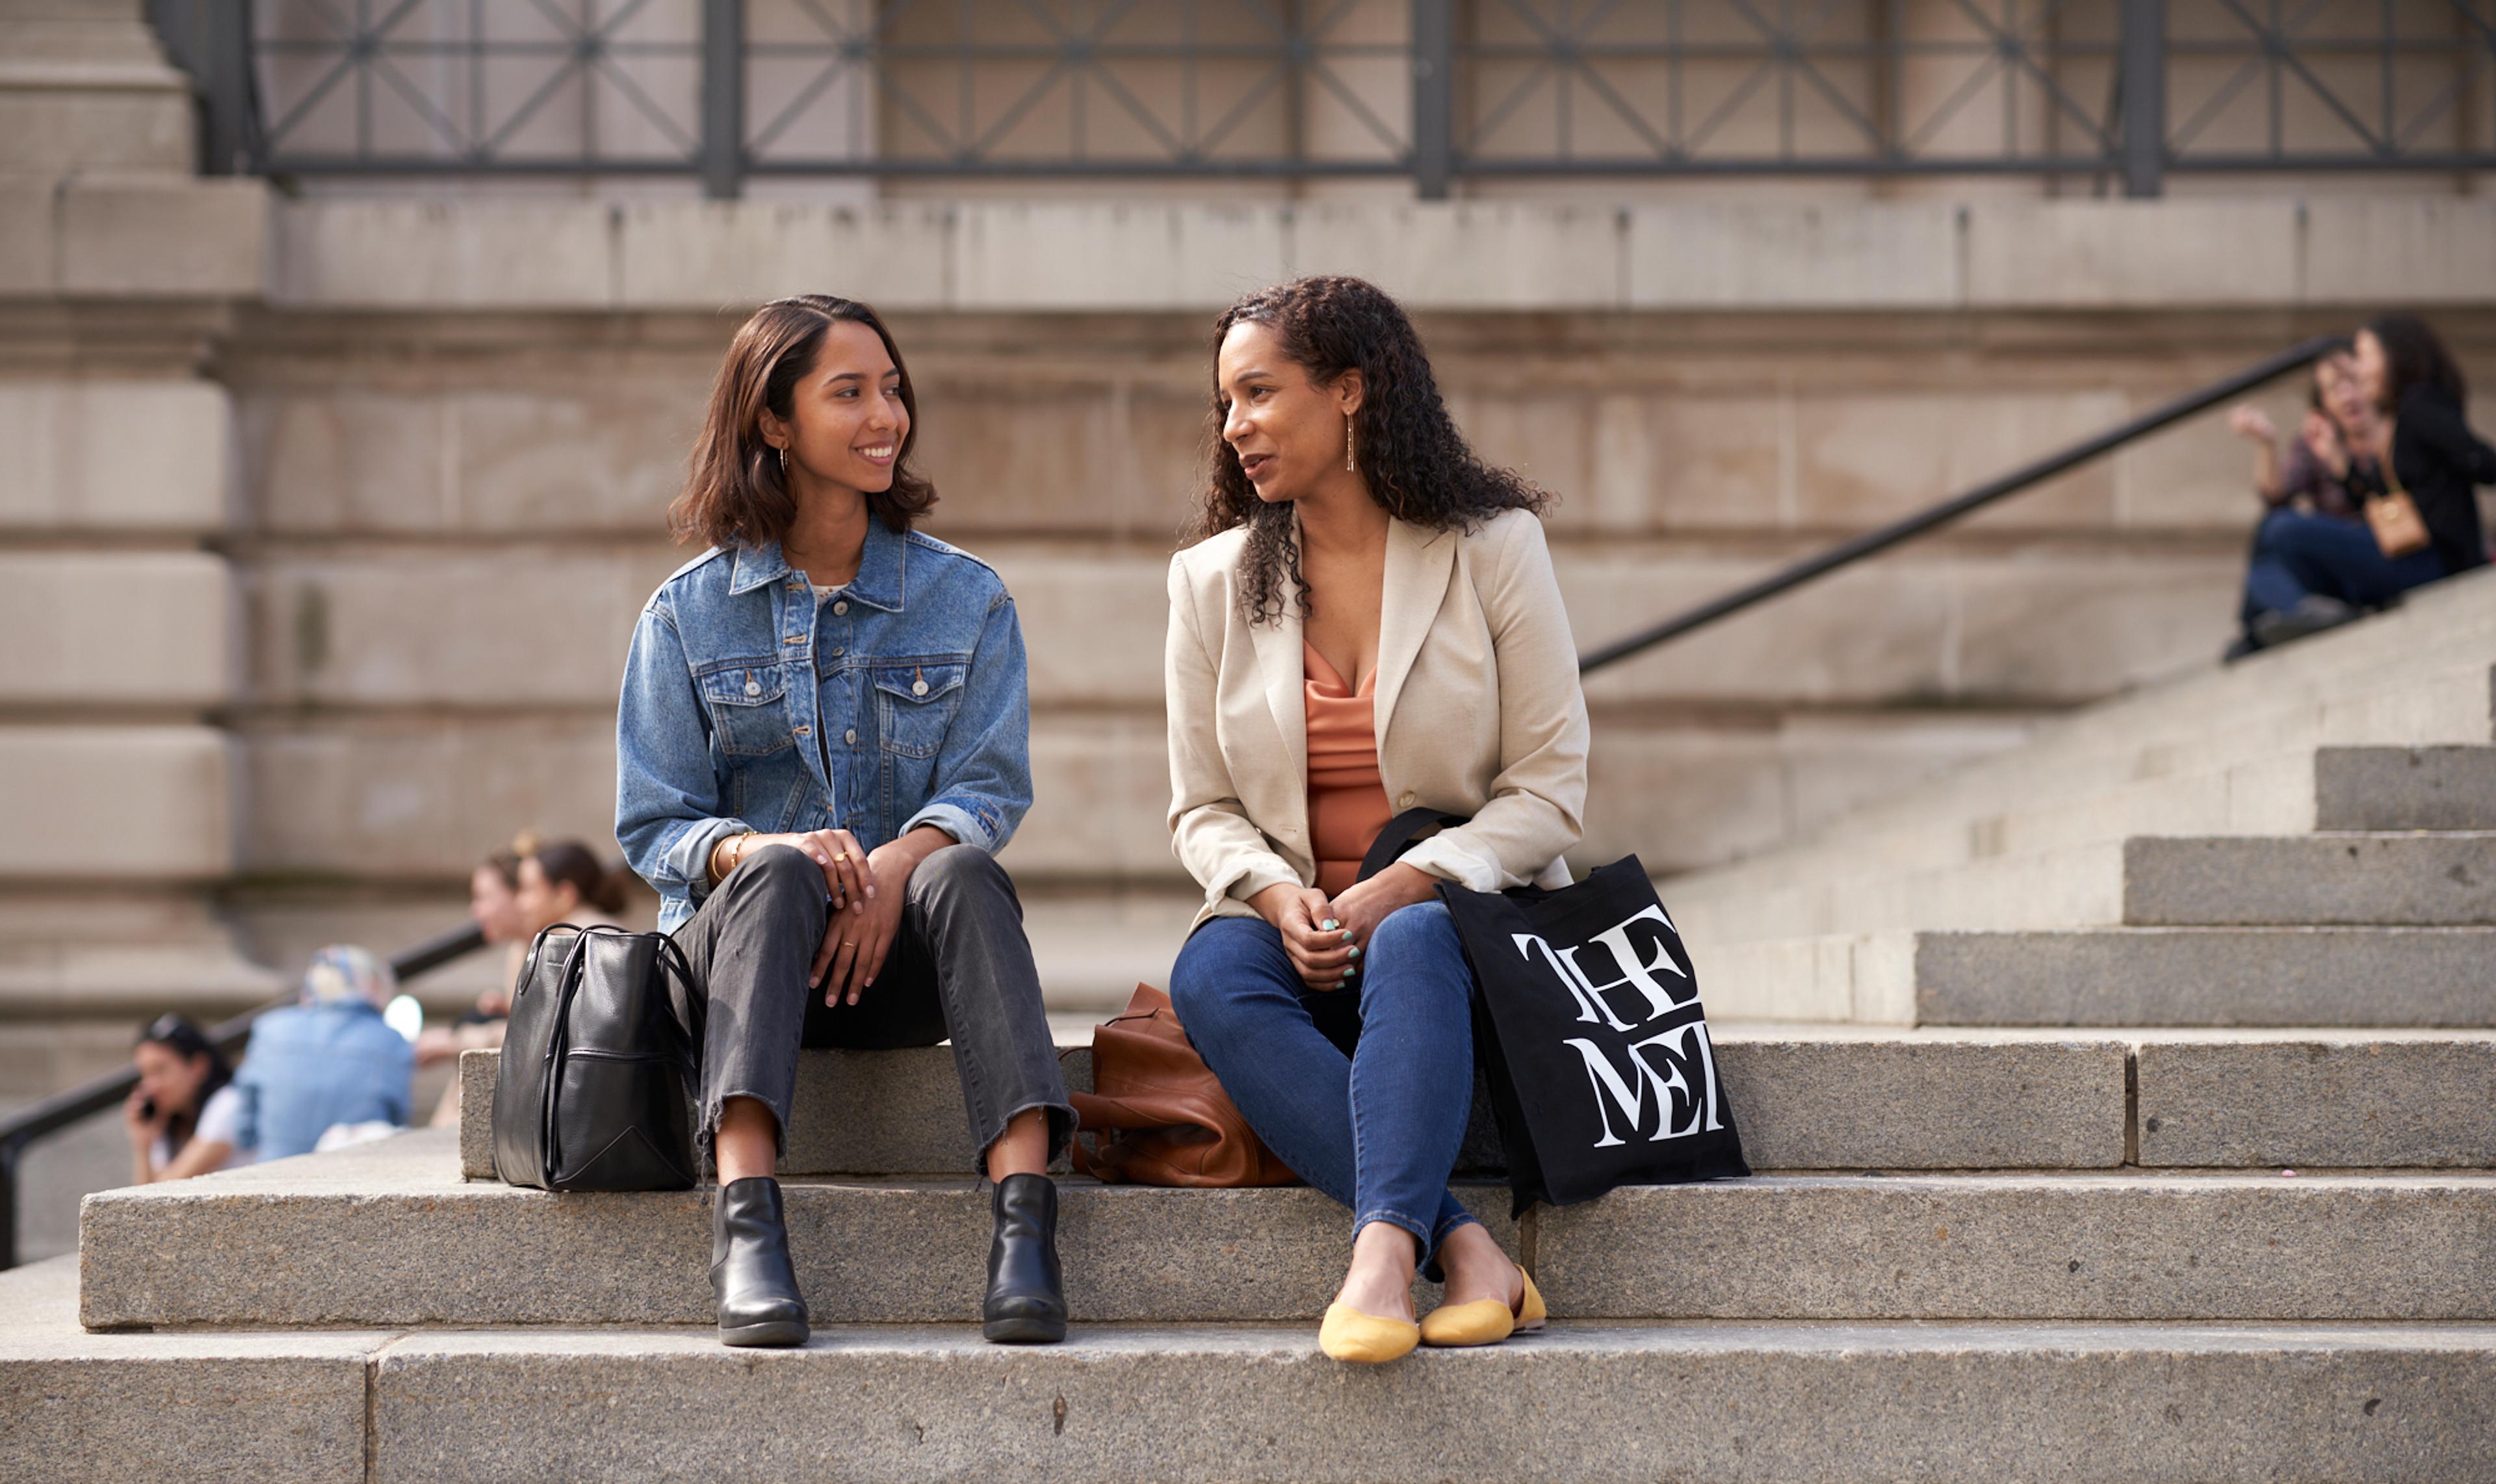 Two women sit chatting on The Met steps.